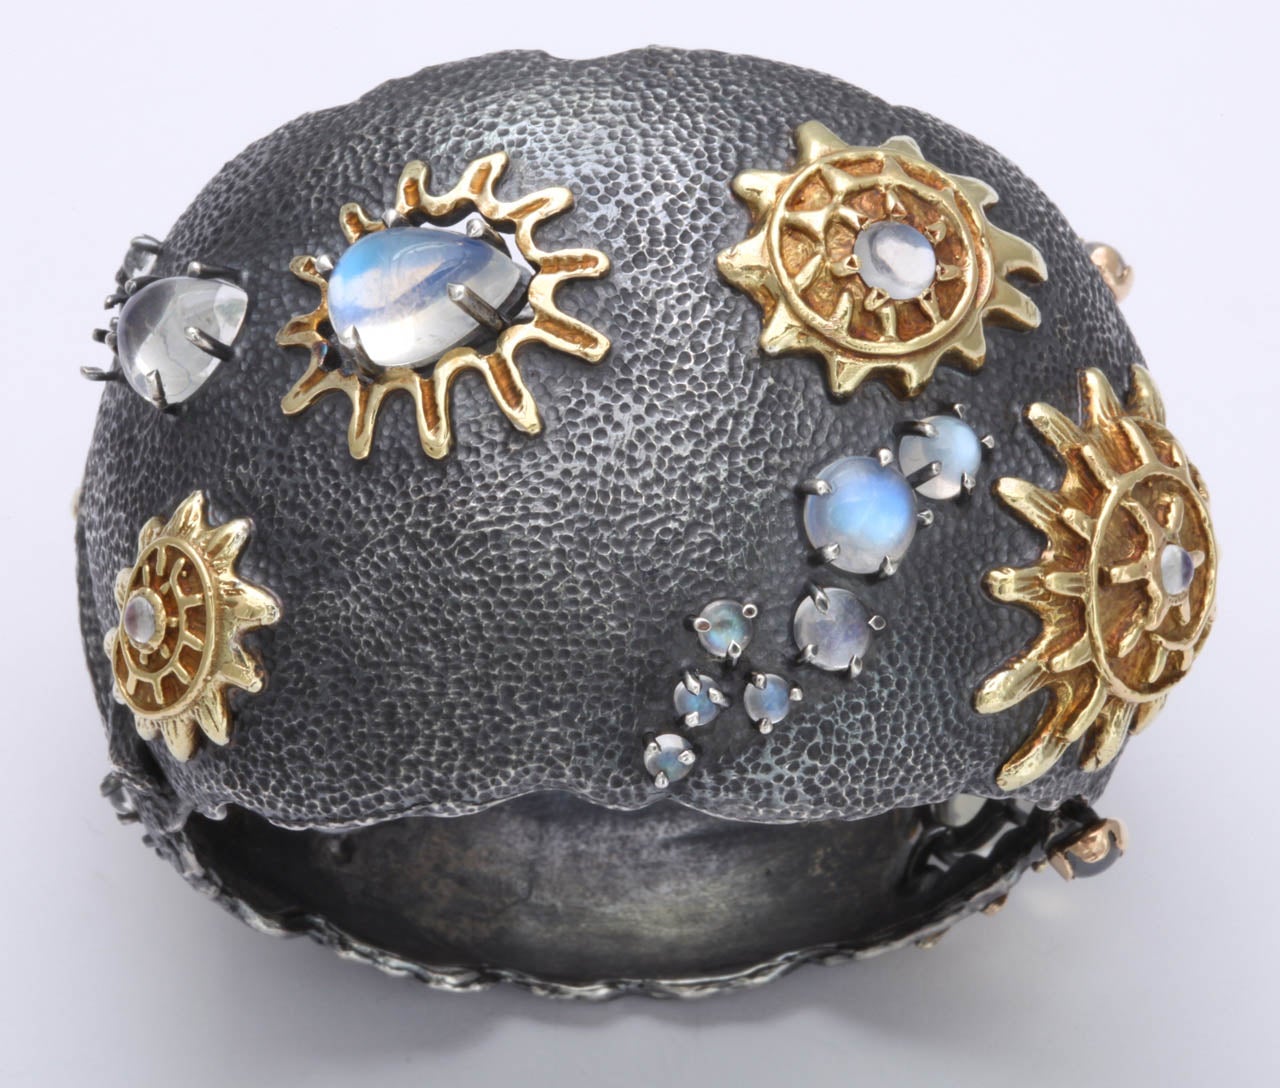 Stunning Patinate & Hand Hammered Silver Cuff Bracelet with Applied 18kt Yellow Gold prong set Cabochon Moonstones of varying sizes & shapes.  Very fanciful & playful